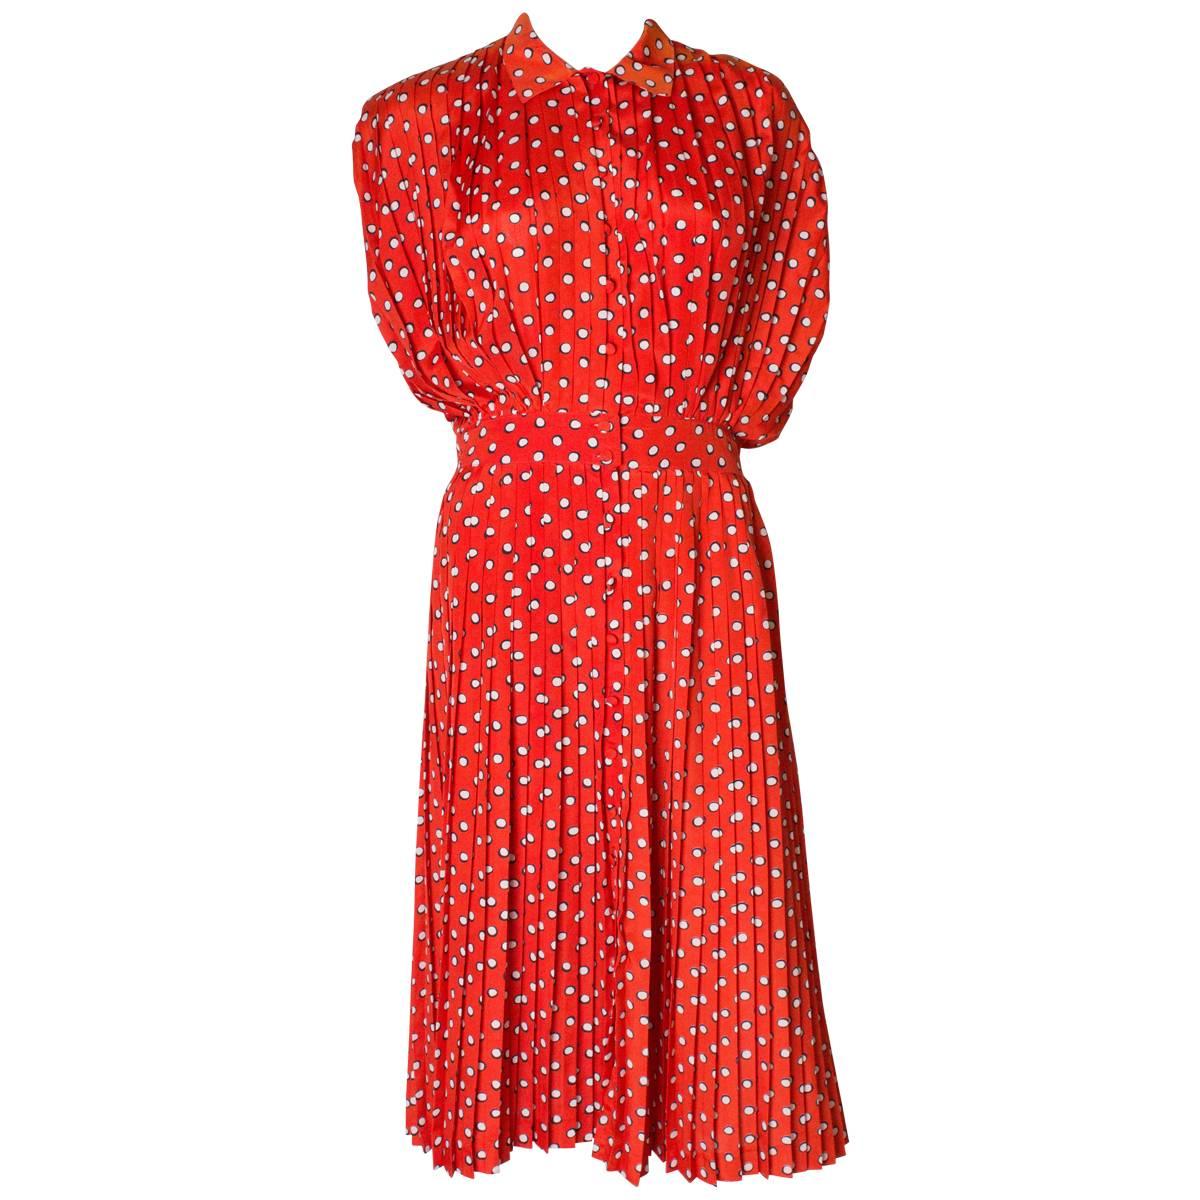 Georges Rechs Spotty Pleated Dress 1970s